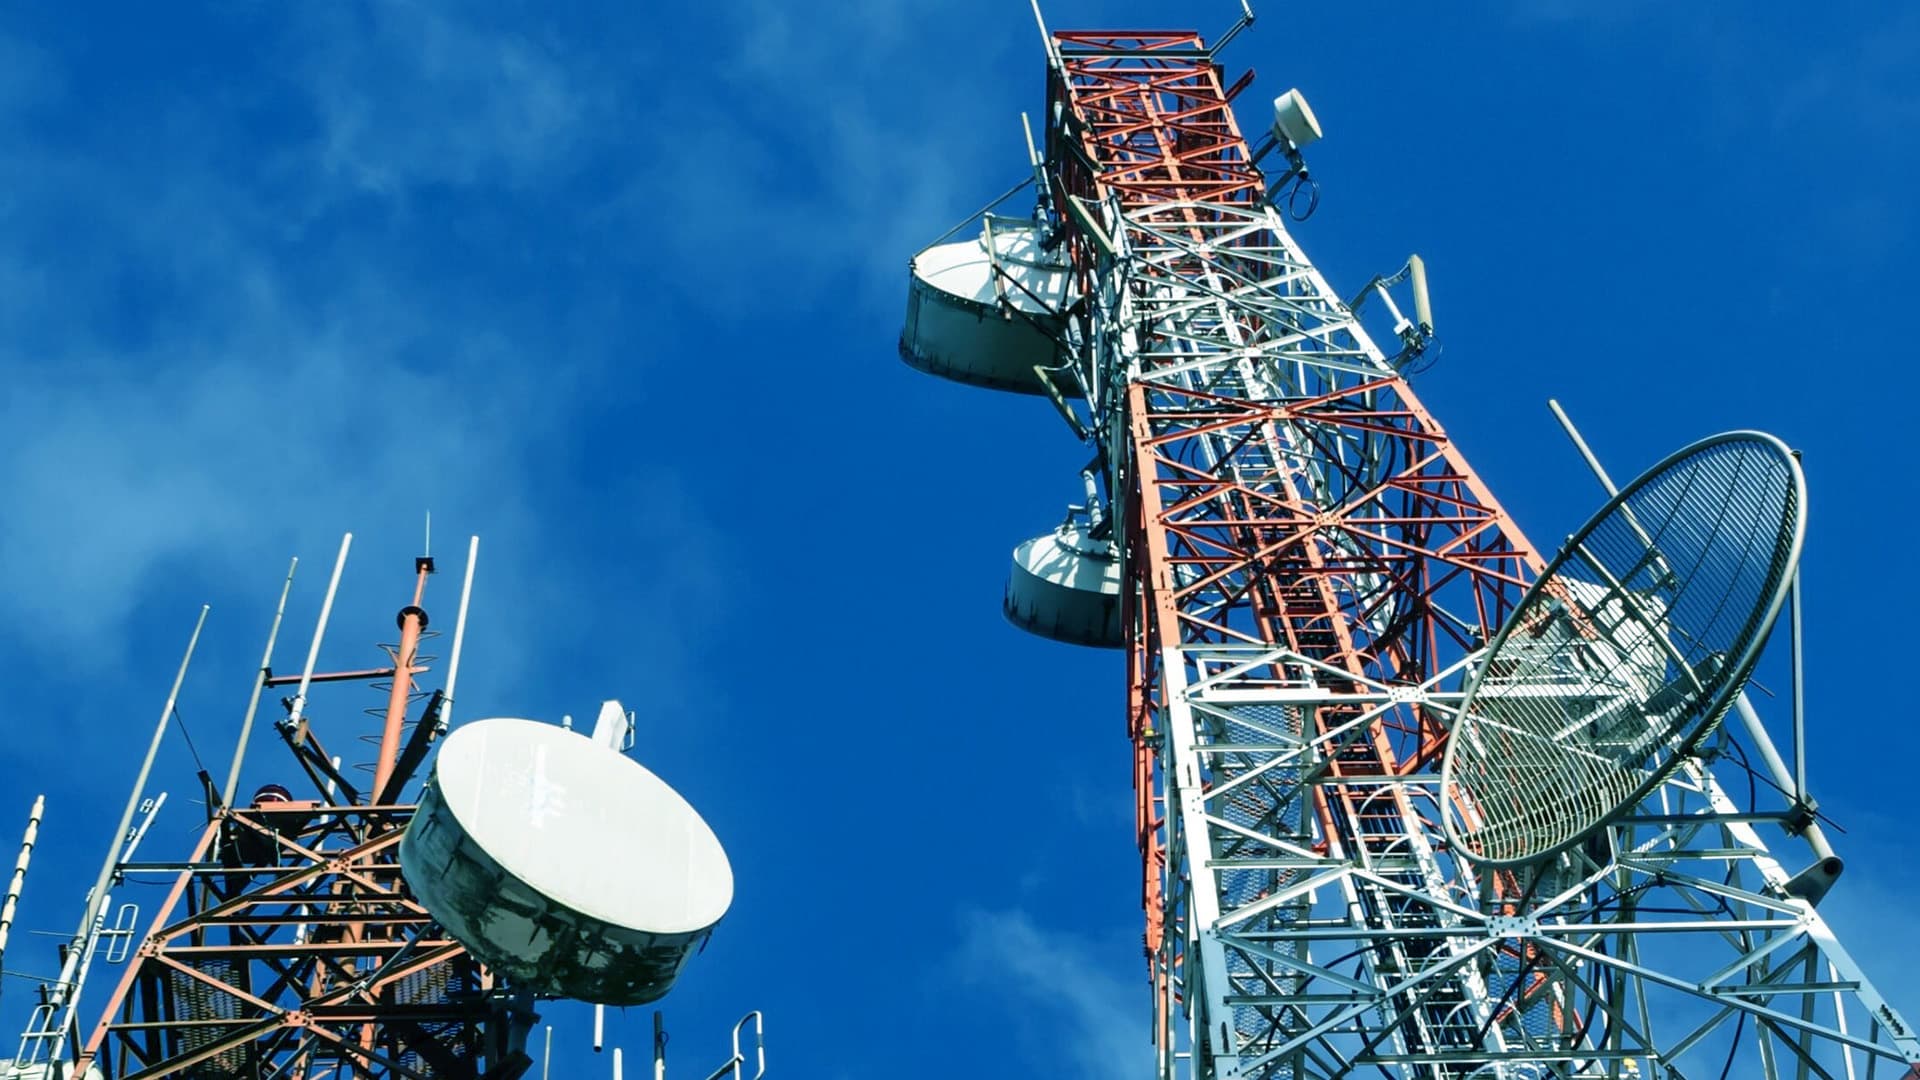 Govt notifies rules to make entities pay for causing damage to telecom infra